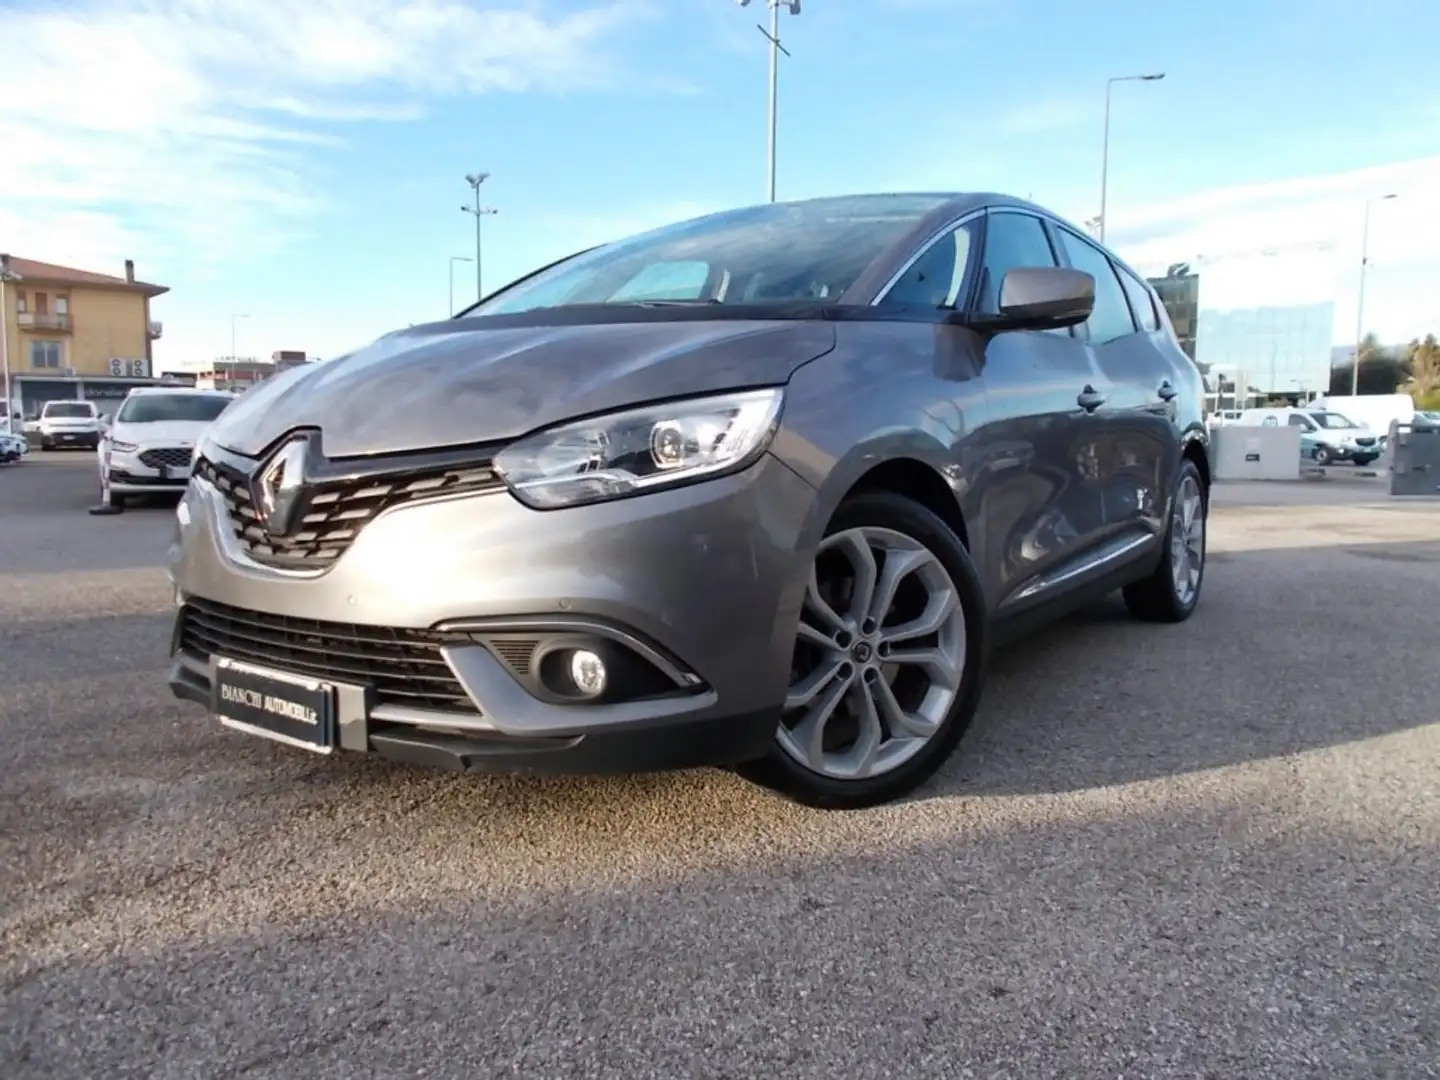 Renault Grand Scenic Blue dCi 120 CV Business Grey - 2